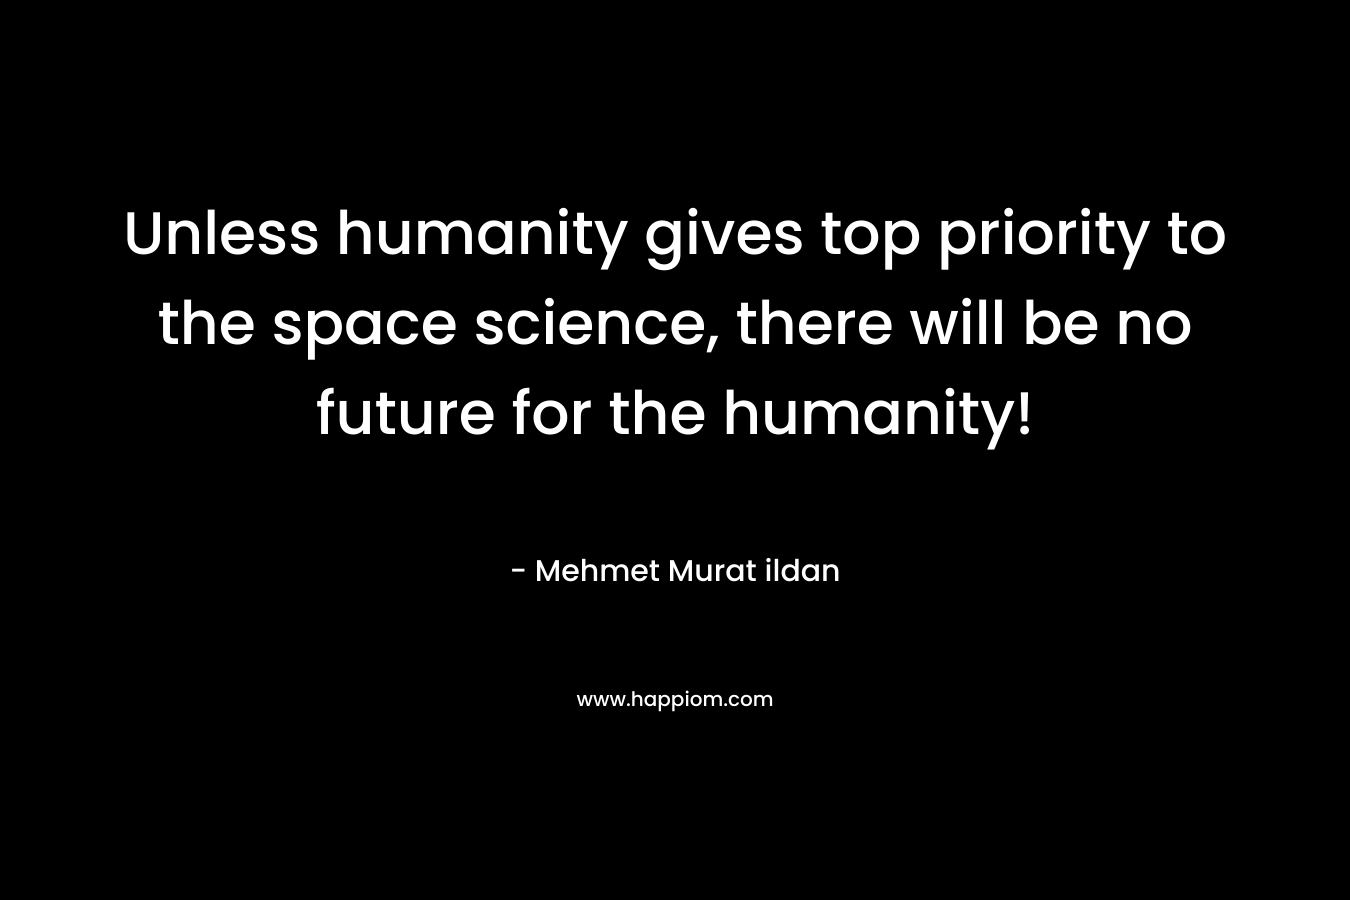 Unless humanity gives top priority to the space science, there will be no future for the humanity!